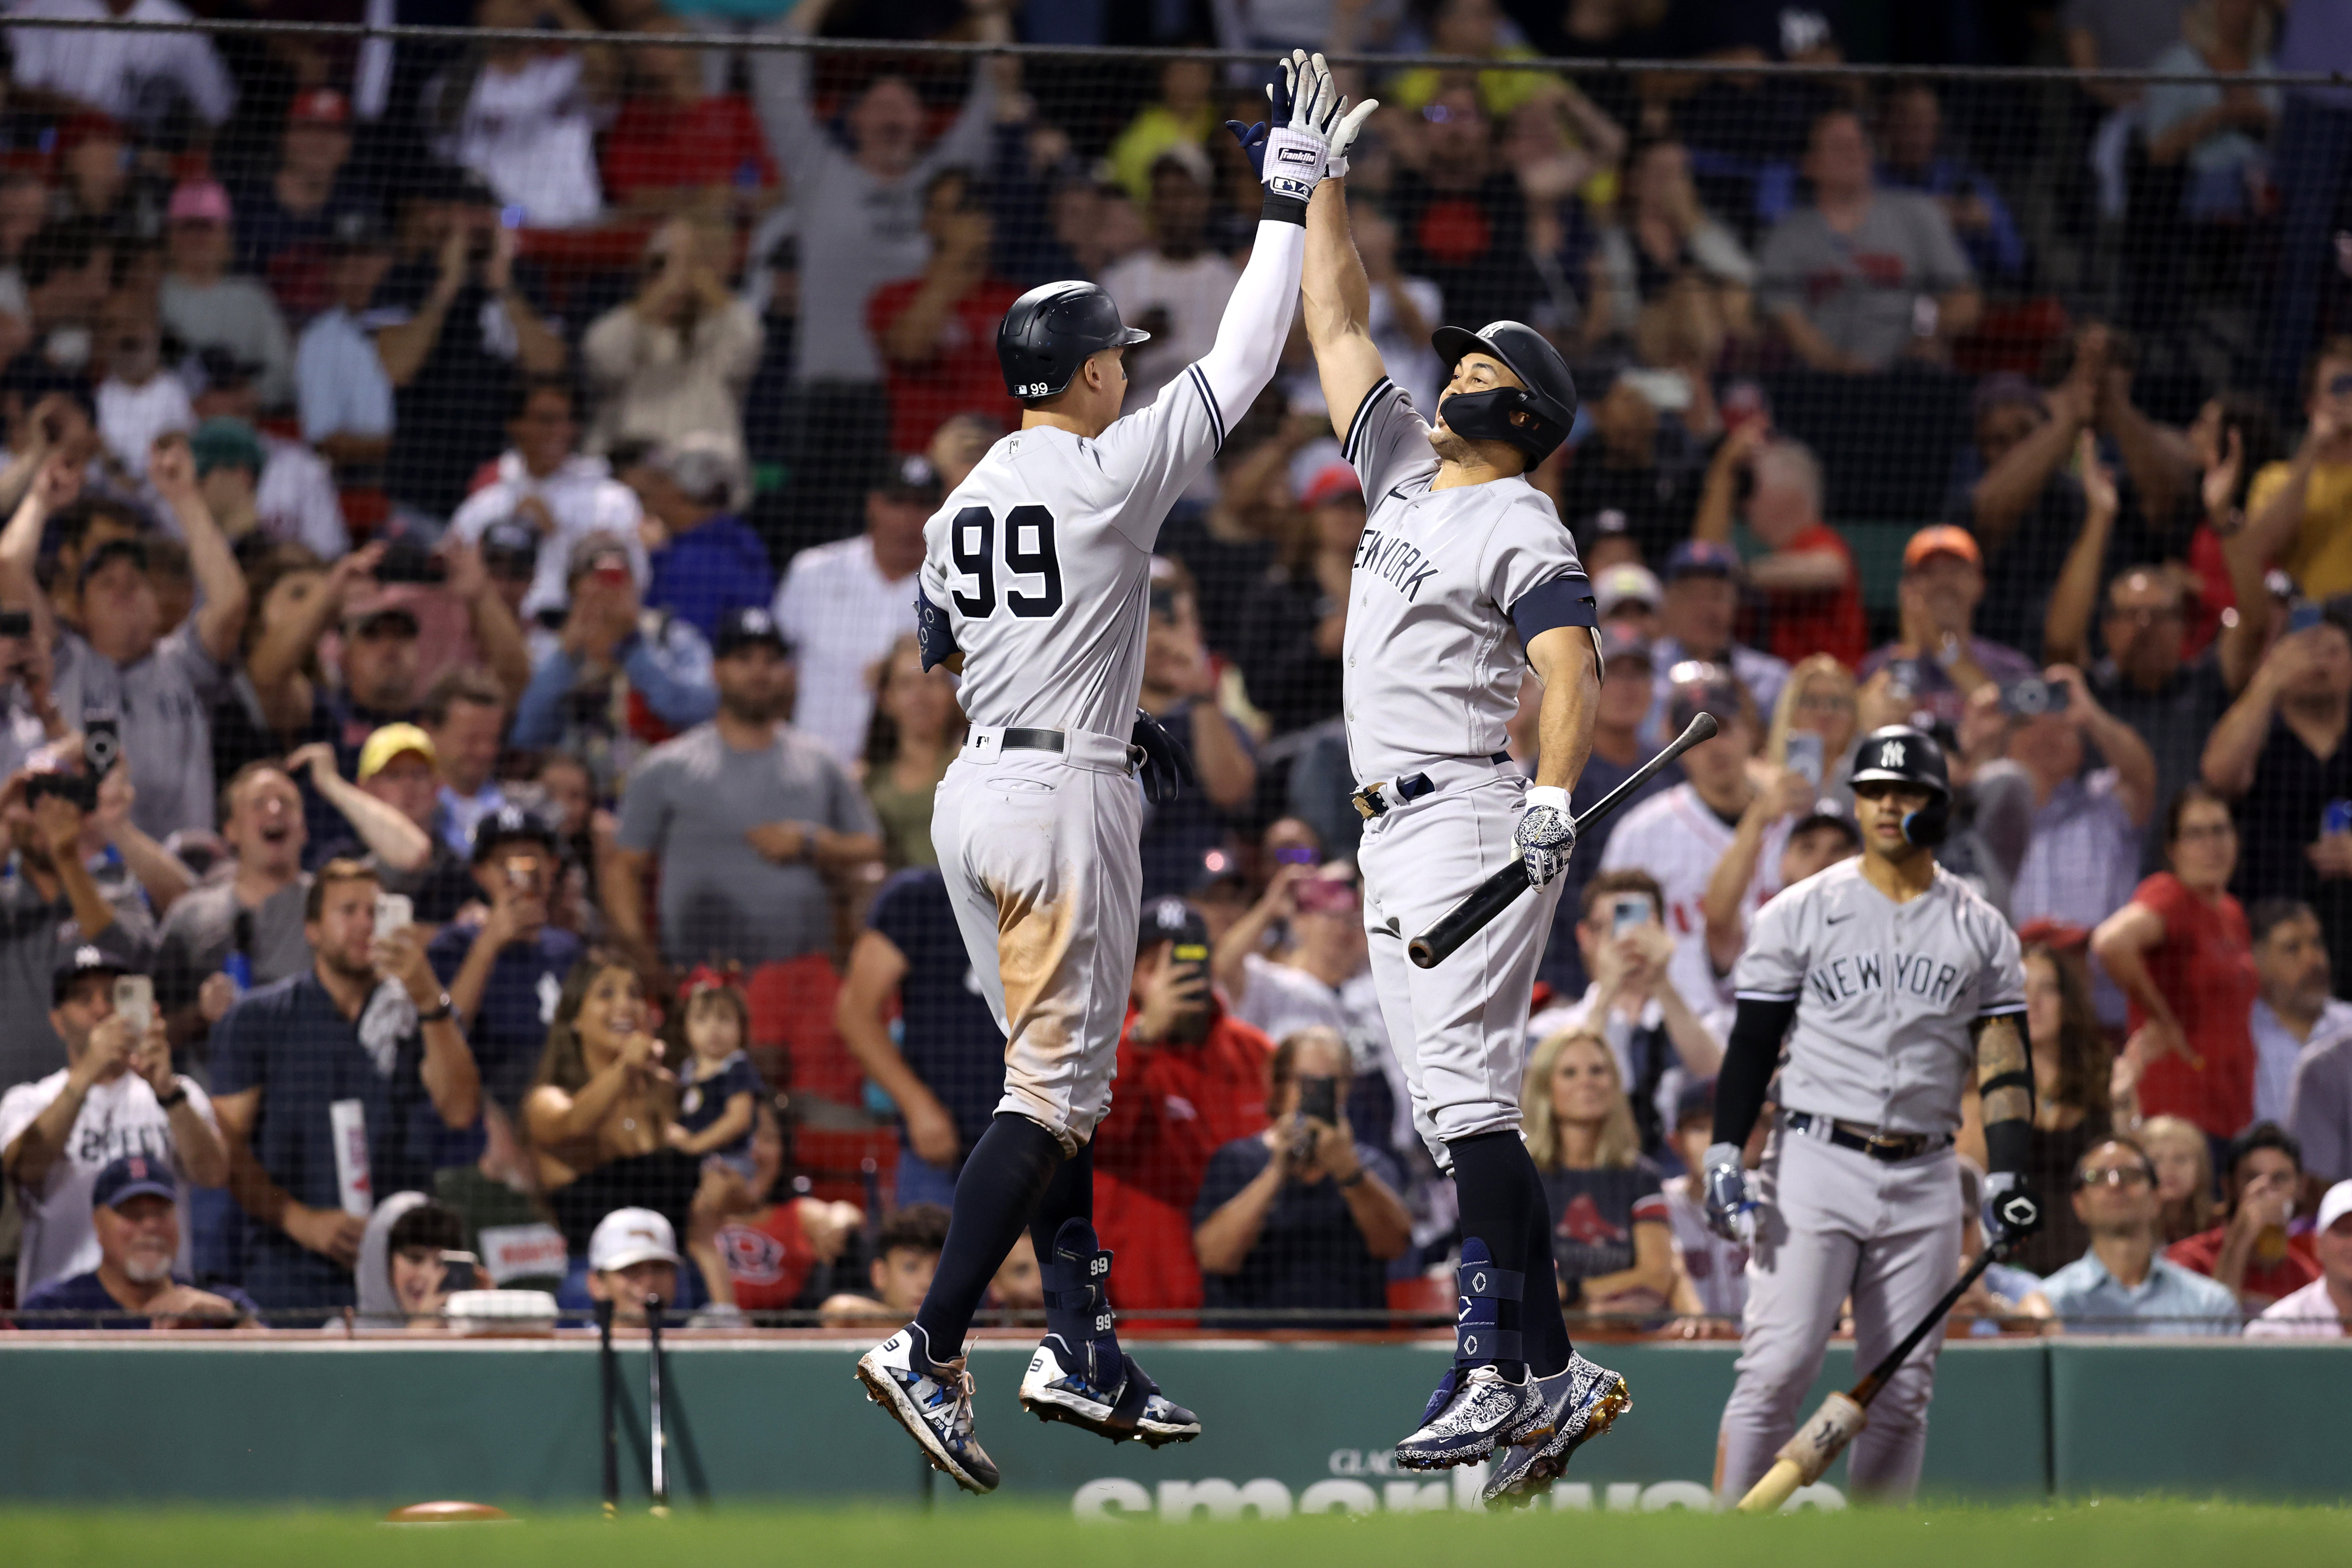 Judge homers twice to reach 57, Yanks beat Sox 7-6 in 10